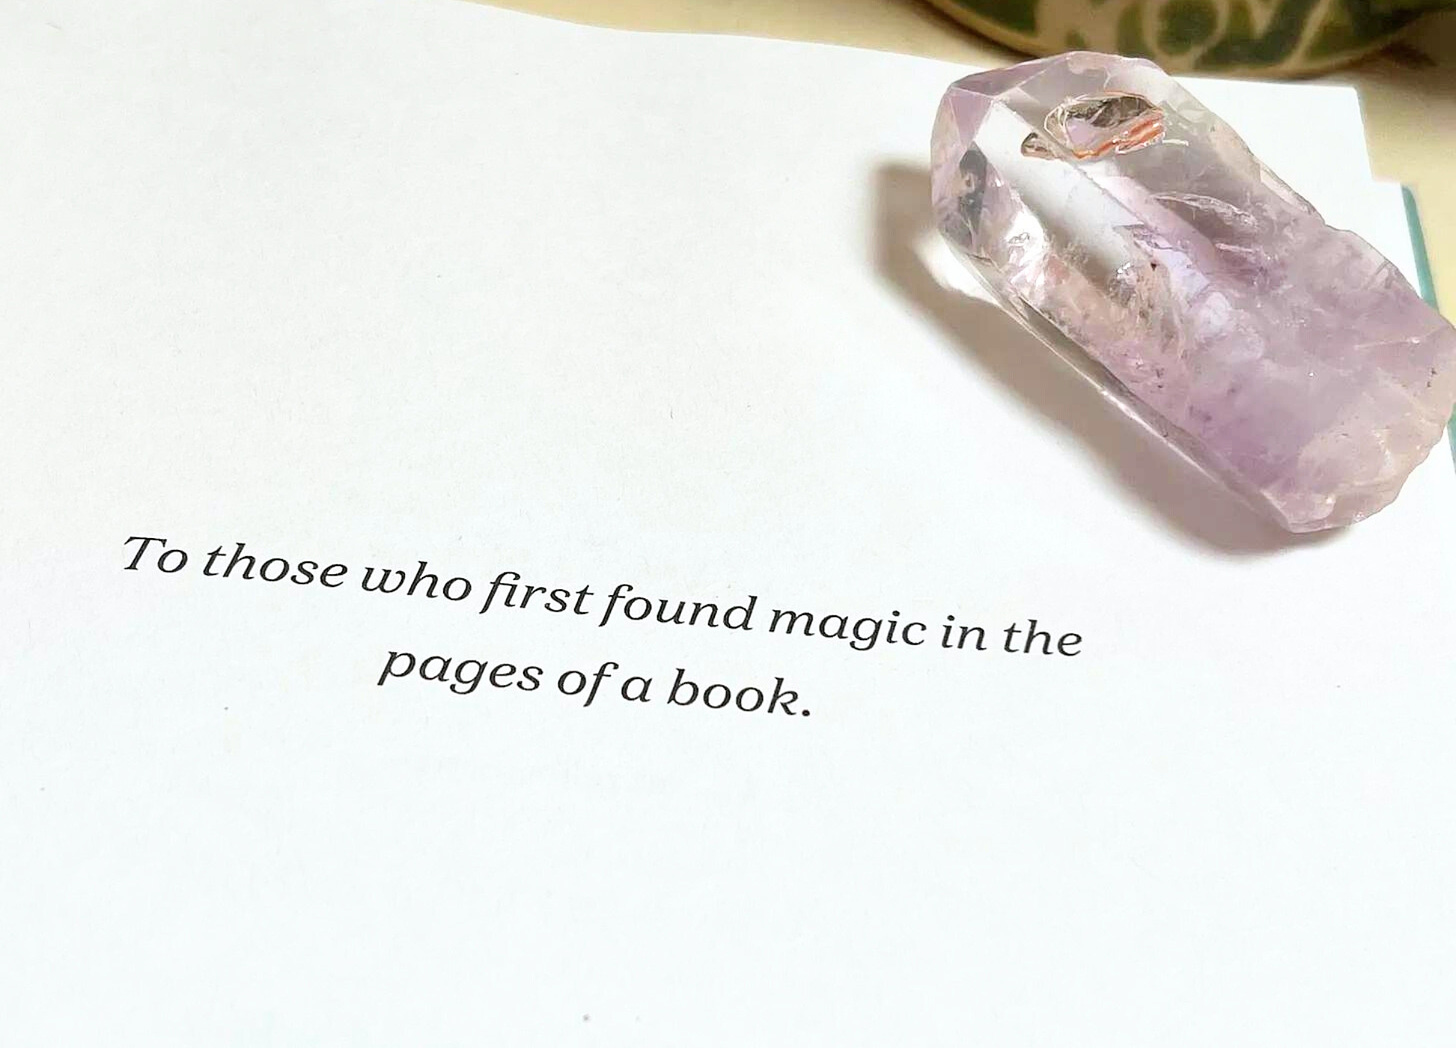 To those who first found magic in the pages of a book.